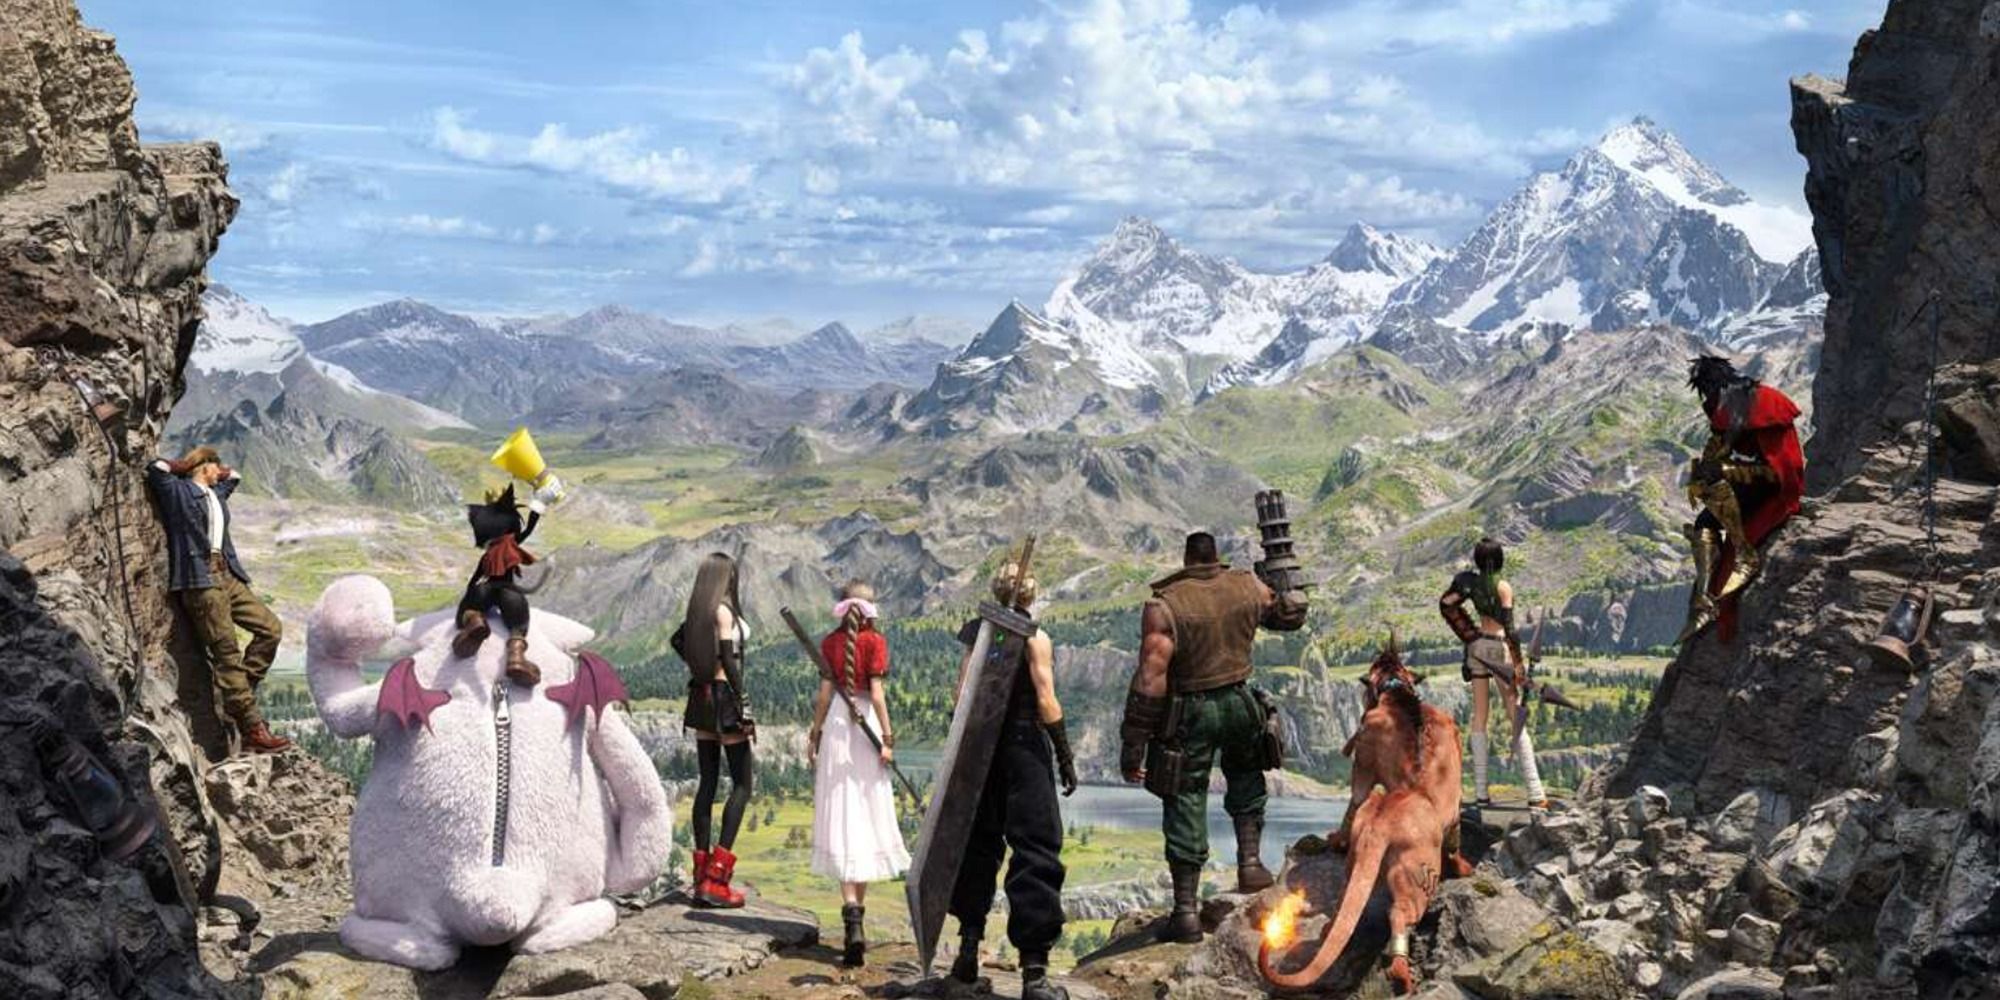 The group surveying the land in Final Fantasy 7 Rebirth